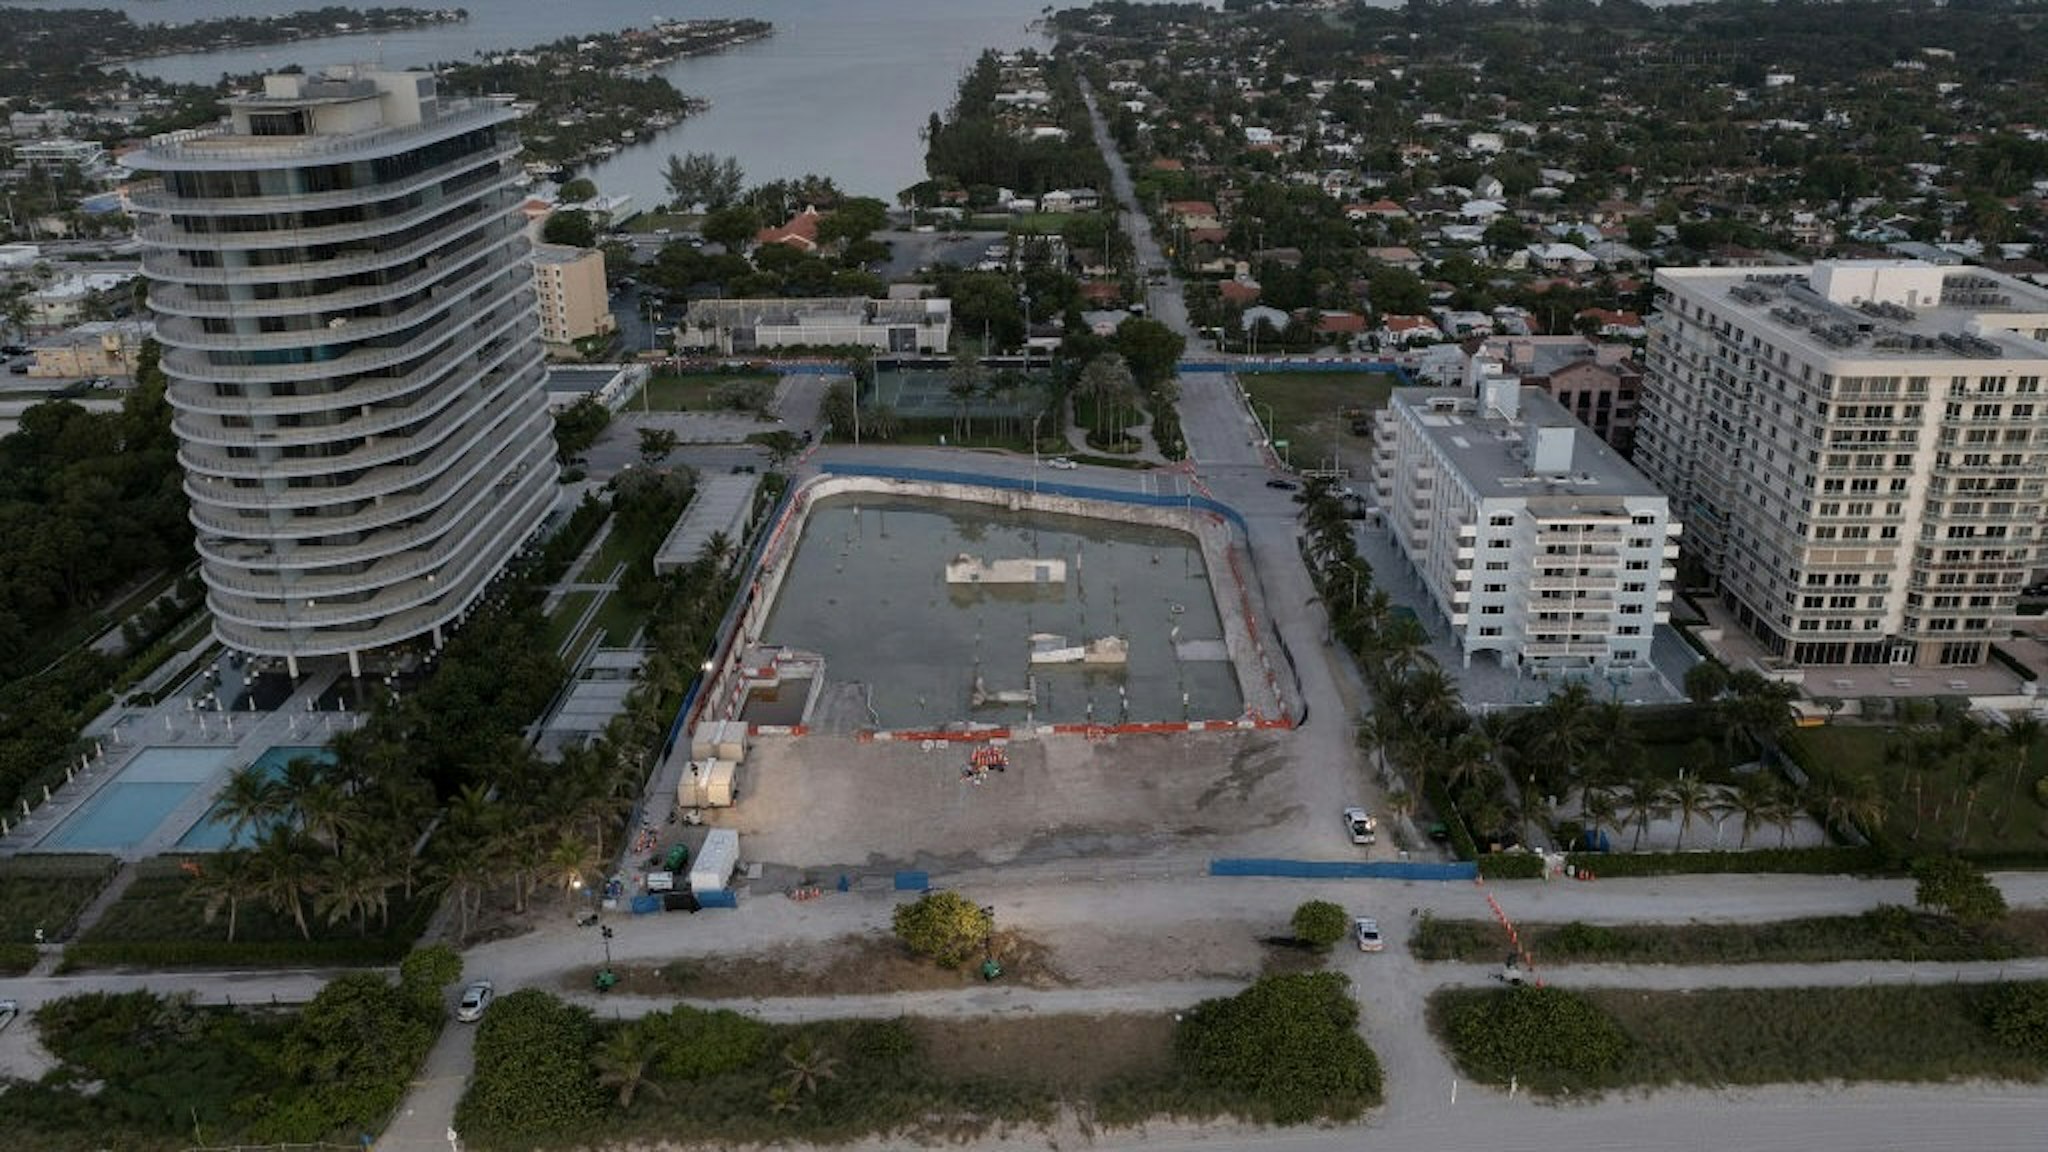 Investigation Continues At Site Of Surfside Building Collapse SURFSIDE, FLORIDA - JULY 31: In this aerial view, the cleared lot that was where the collapsed 12-story Champlain Towers South condo building once stood on July 31, 2021 in Surfside, Florida. A total of 98 people died when the building partially collapsed on June 24, 2021. (Photo by Joe Raedle/Getty Images) Joe Raedle / Staff via Getty Images